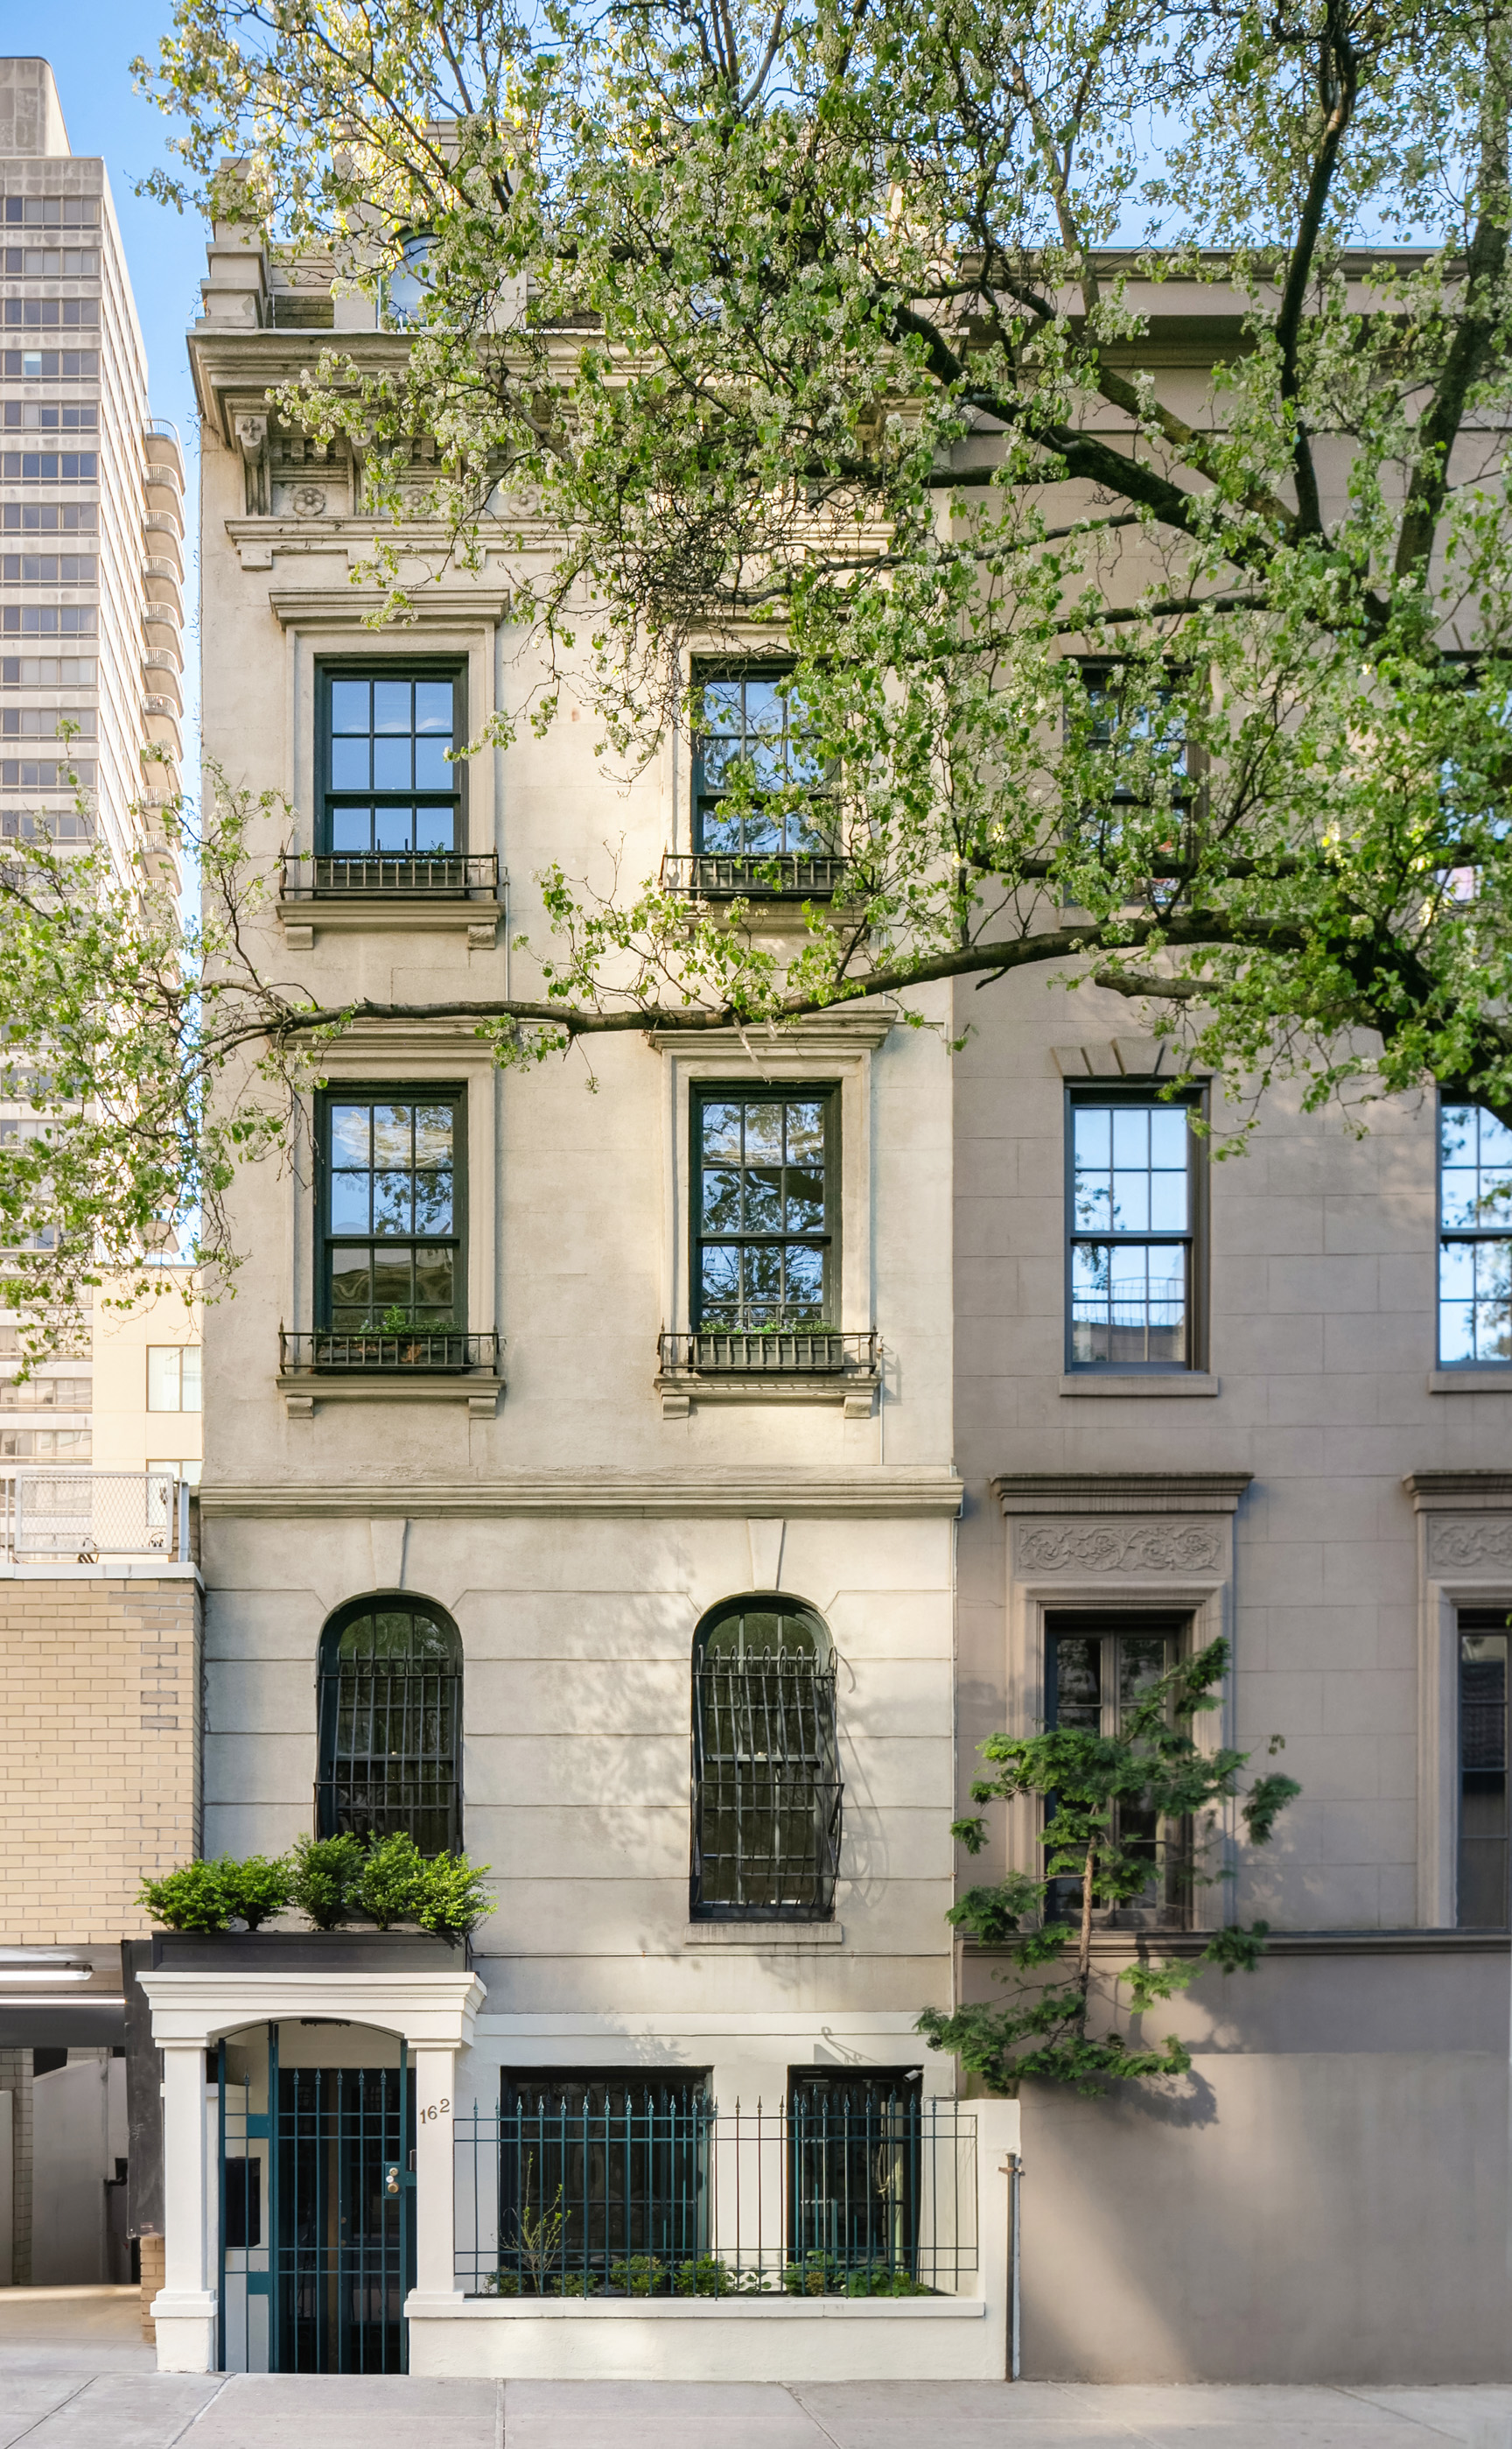 Bravo TV’s Real Housewives’ Sonja Morgan’s Upper East Side Townhouse is Pending Sale in Just 35 Days